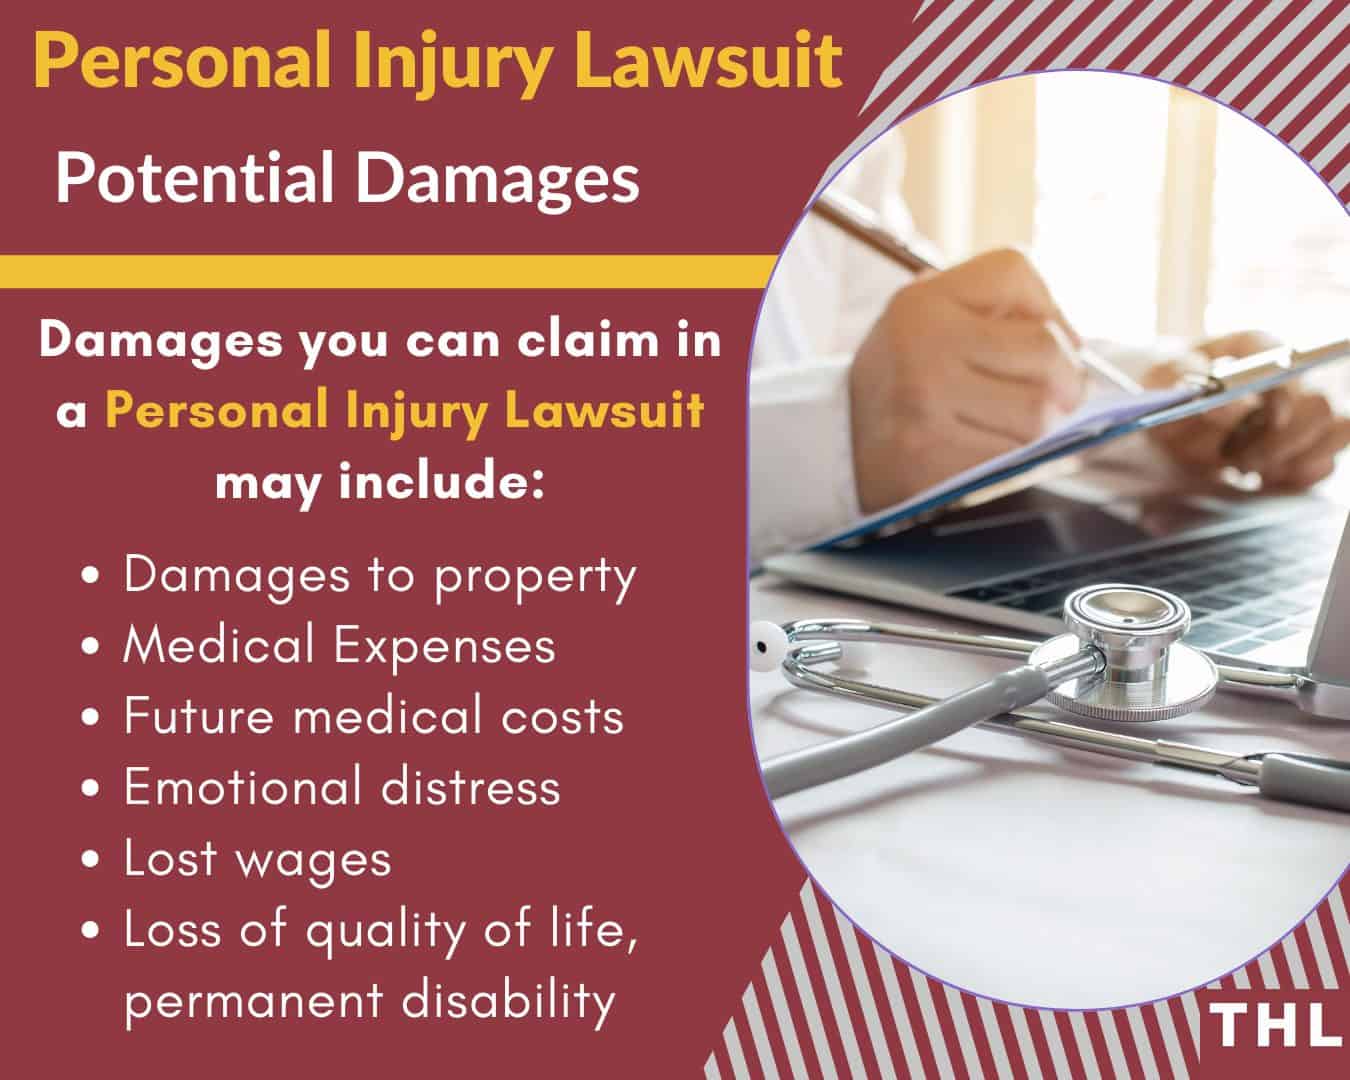 edwardsville personal injury; edwardsville personal injury lawyer; edwardsville personal injury lawsuit; edwardsville personal injury attorney; edwardsville injury lawyer; edwardsville injury; legal action; lawsuit; filing a lawsuit in edwardsville; southern illinois injury lawyer; how to file a lawsuit in edwardsville